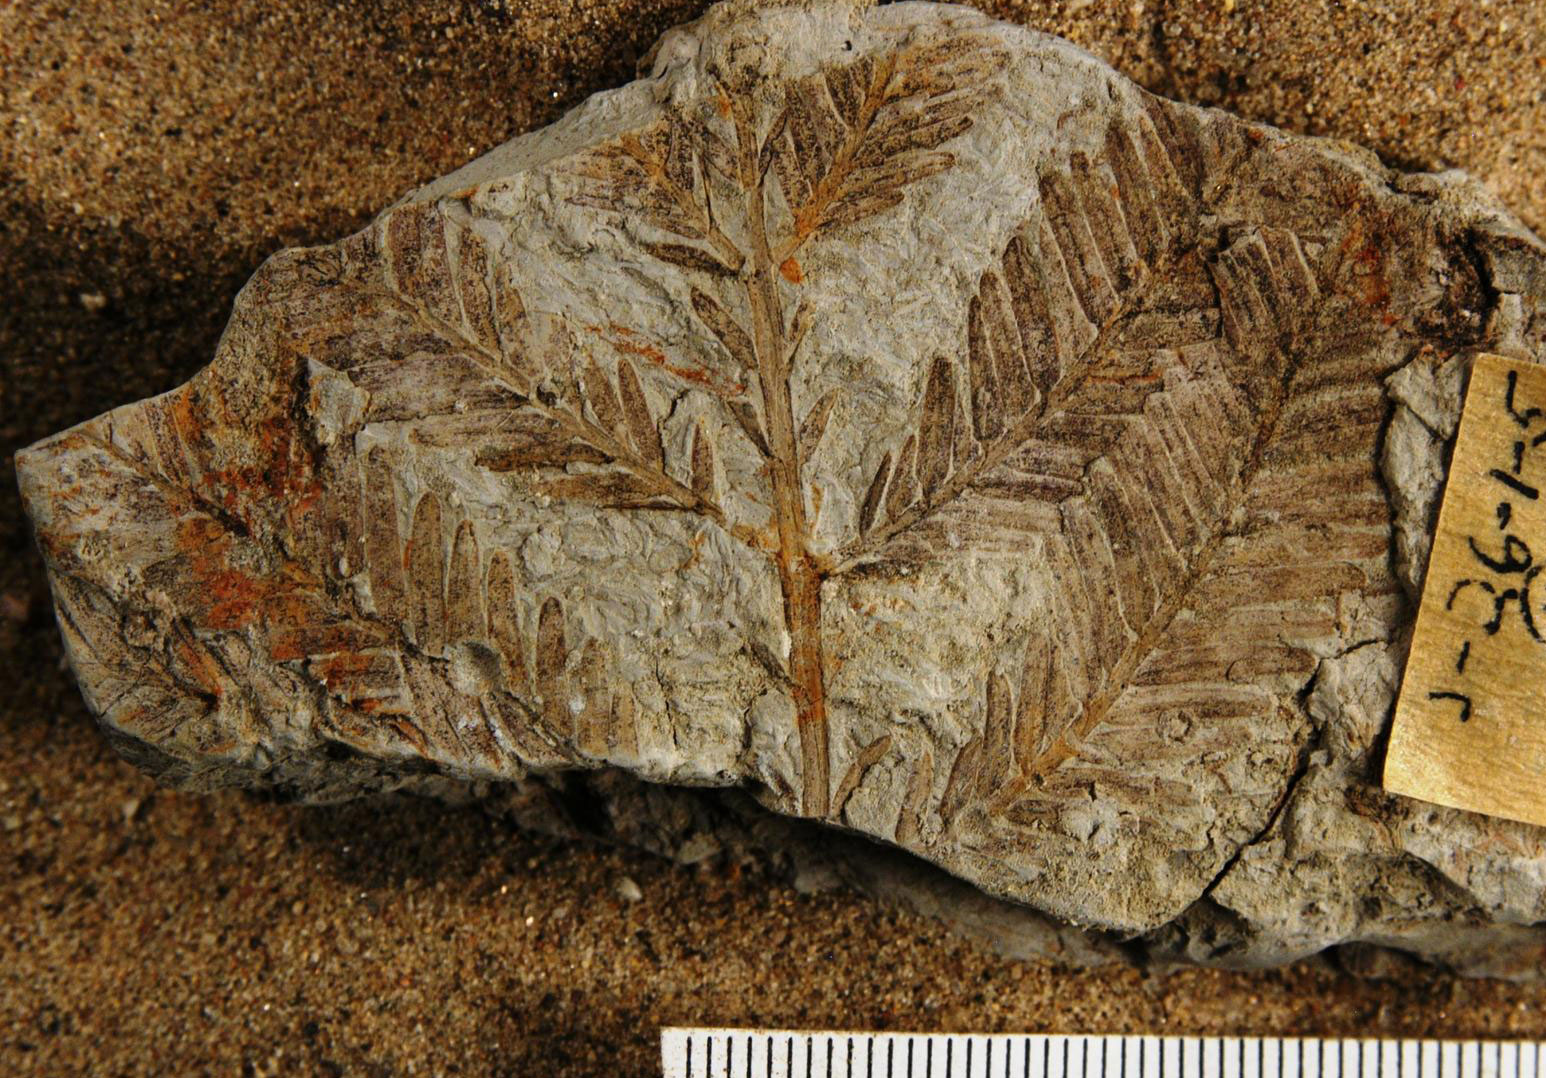 Photograph of a fossil dawn redwood from the Paleocene of North Dakota. The photo shows a rock preserving an impression of a small branch with lateral, oppositely arranged branchlets. The branchlets have need leaves, also borne in opposite pairs. 